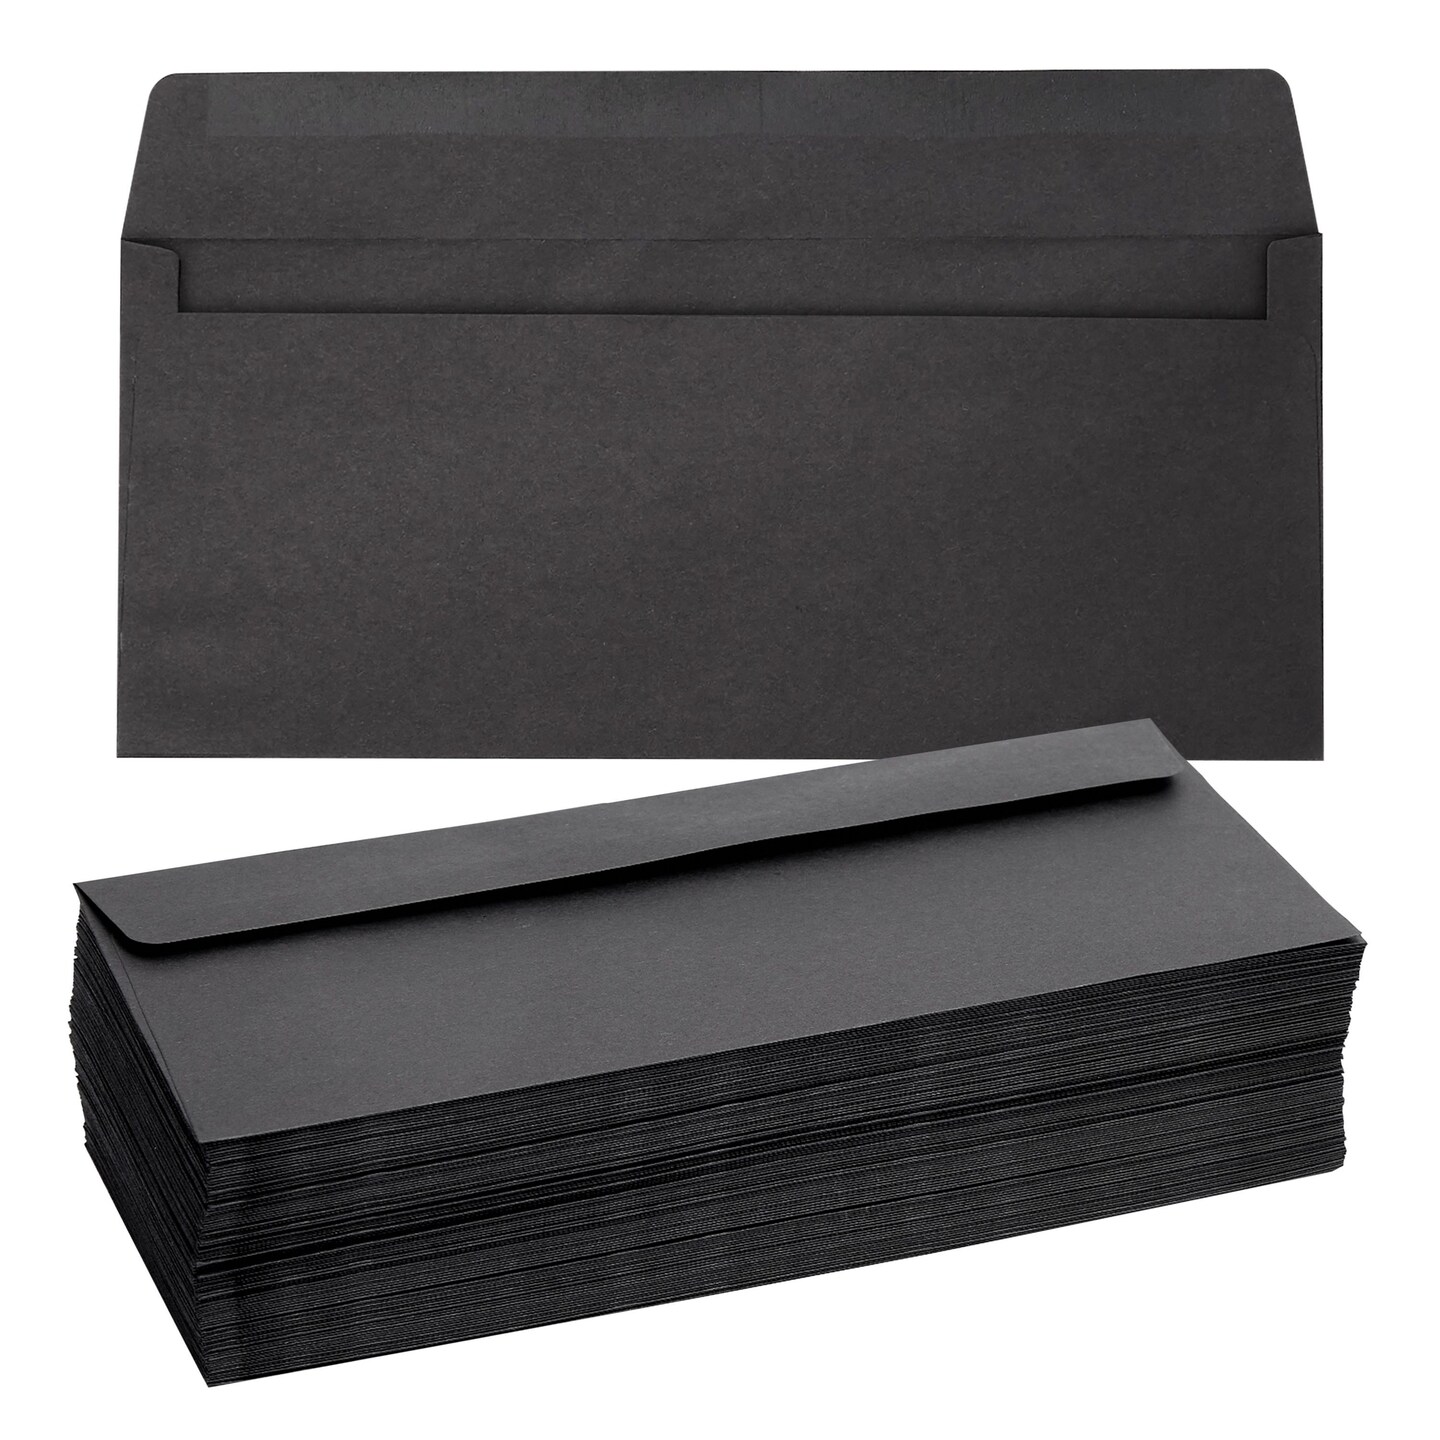 100 Pack #10 Black Envelopes with Square Flap for Mailing Letters, Invitations (4 1/8 x 9 1/2 In)